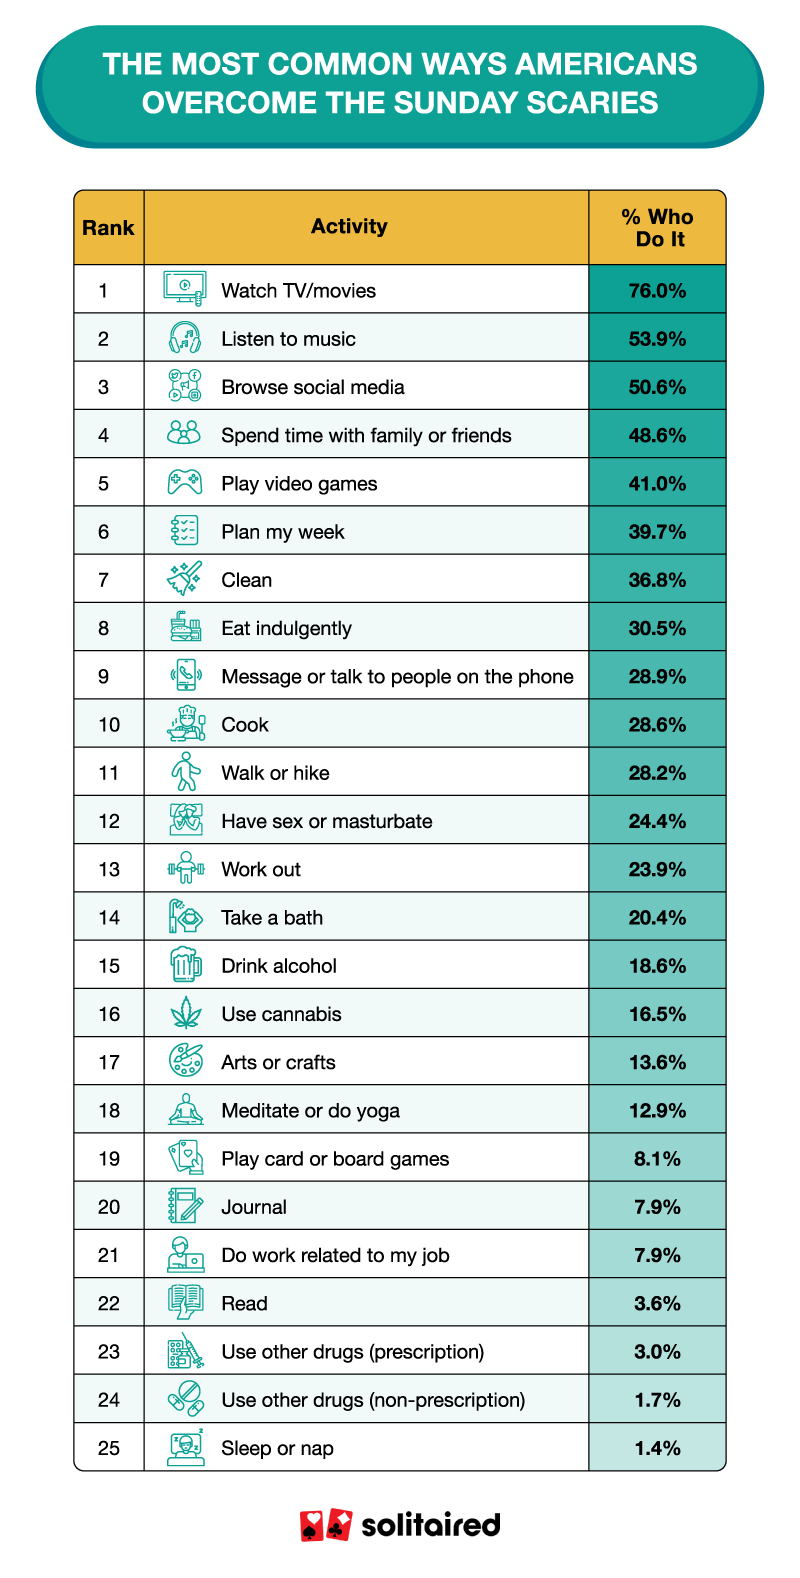 A table showing the most common activities Americans take part in to overcome the Sunday scaries